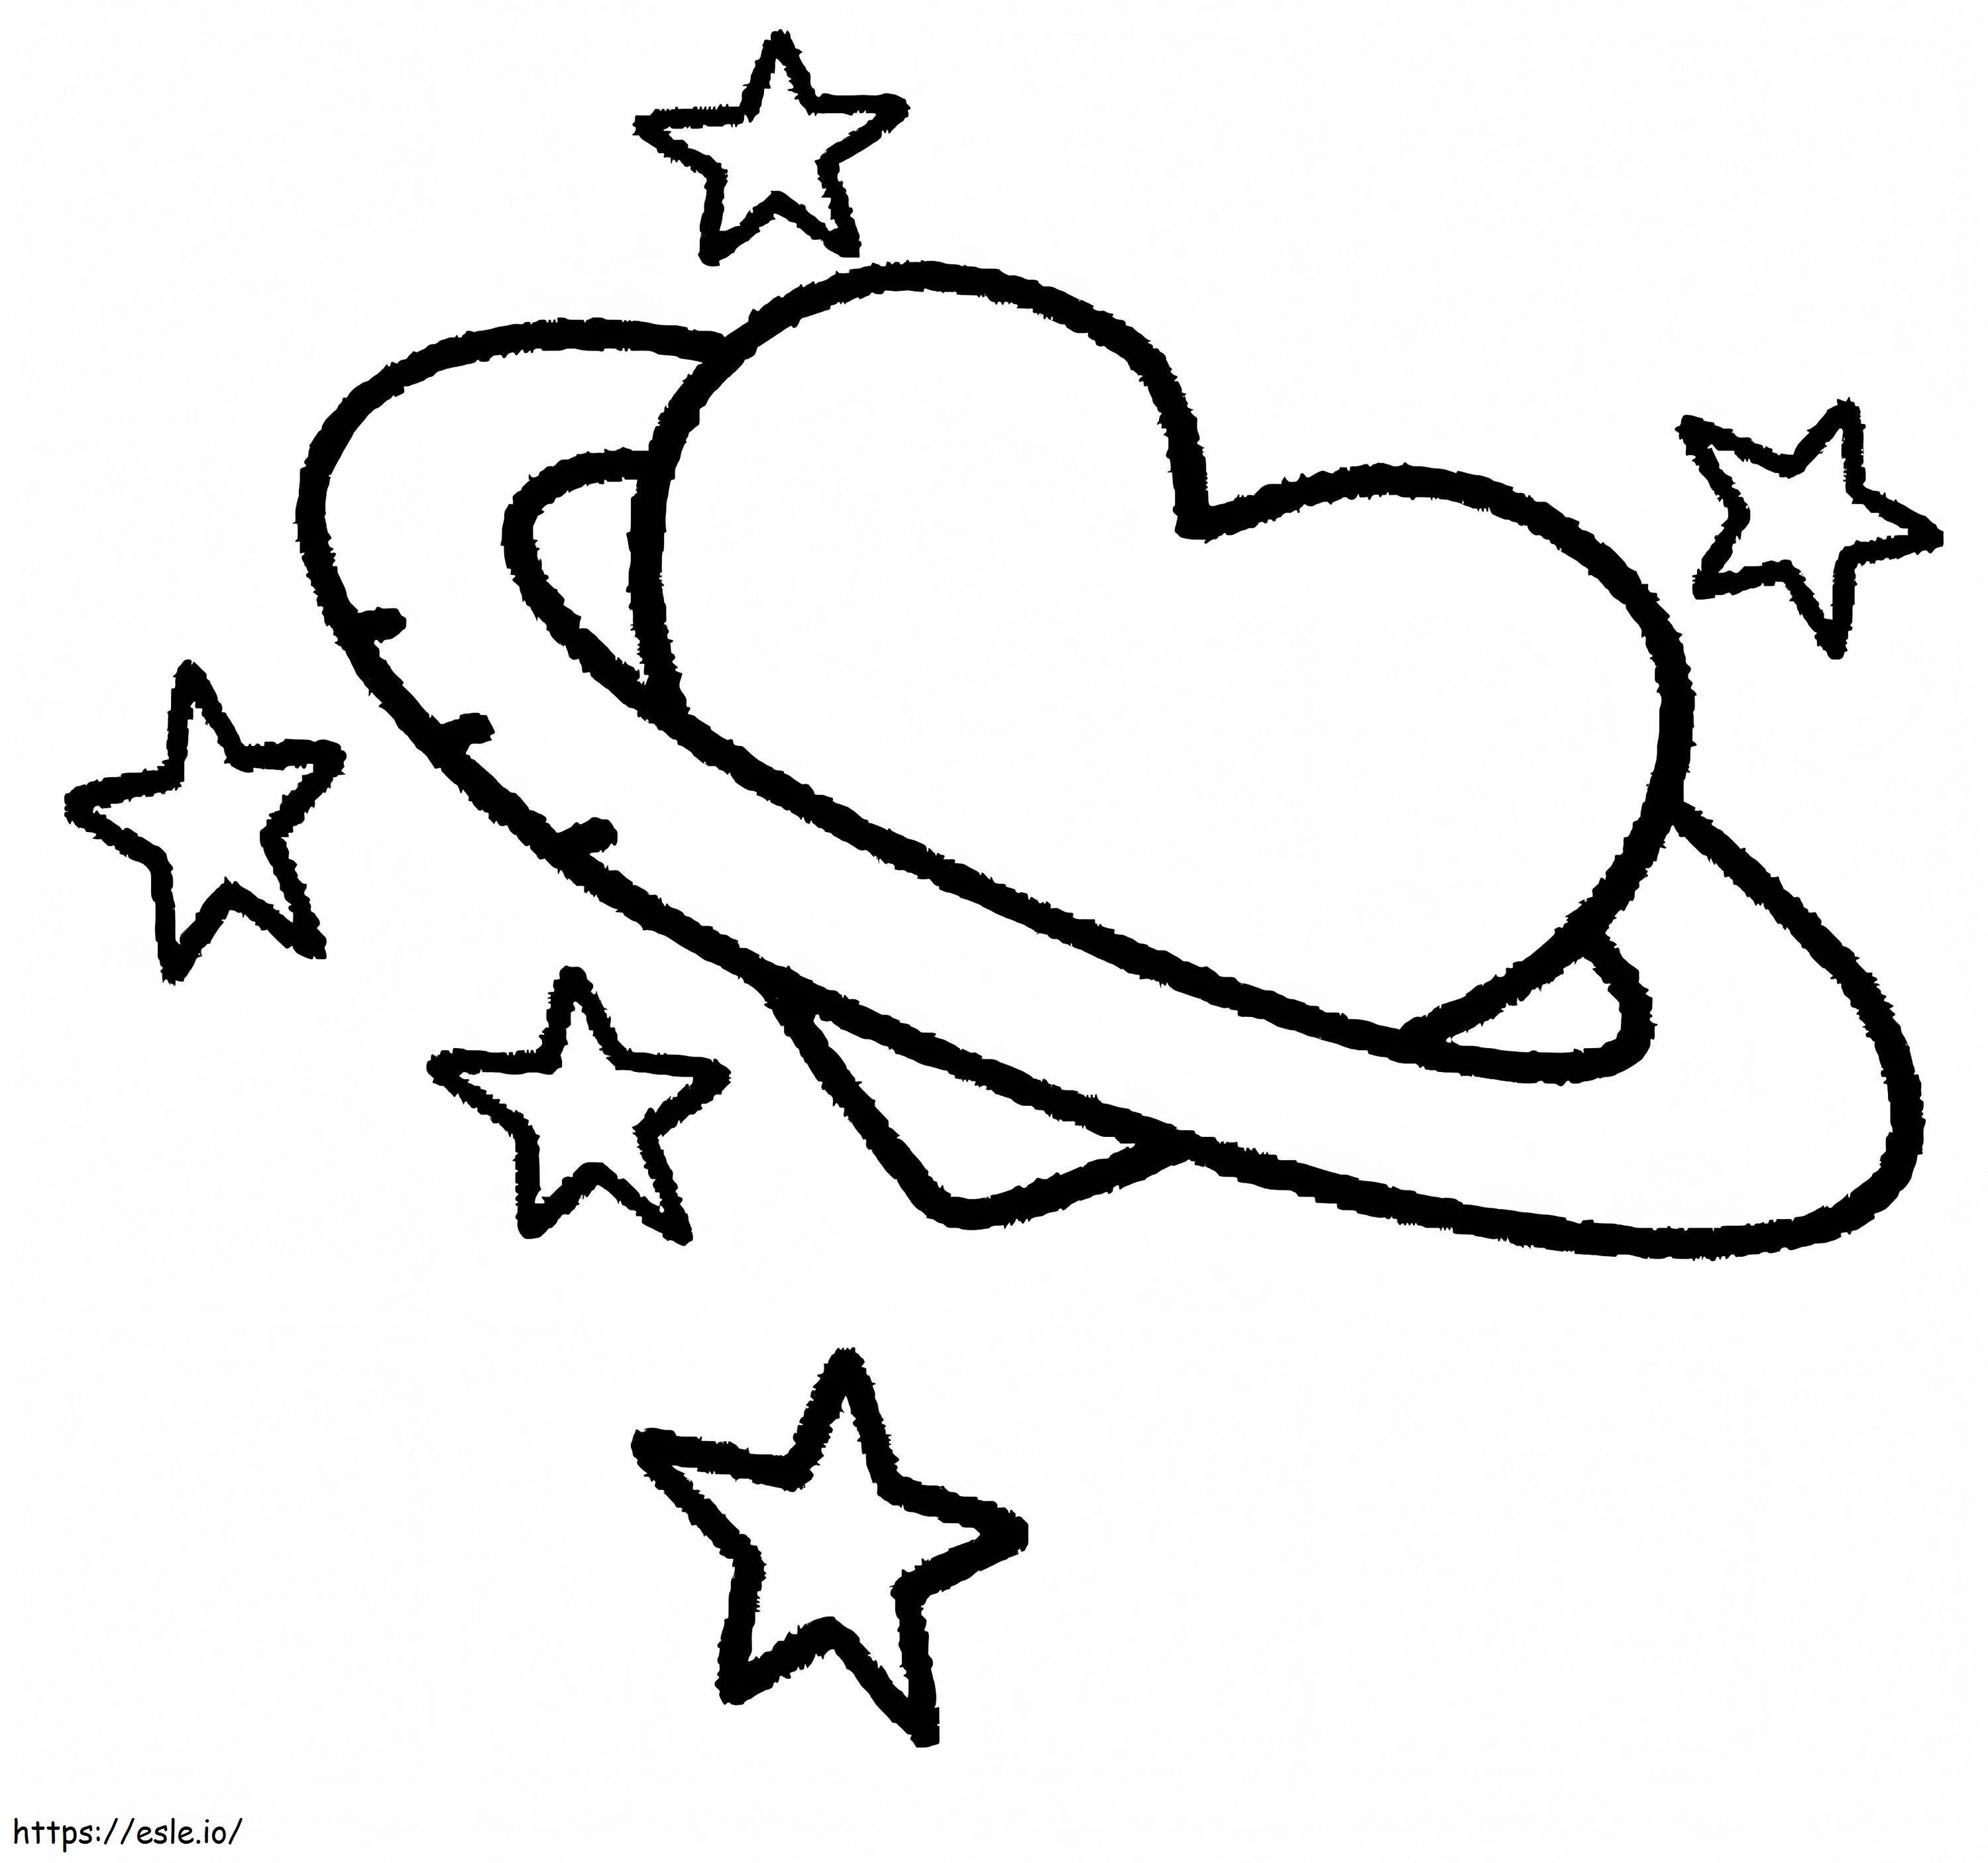 Planet Heart coloring page